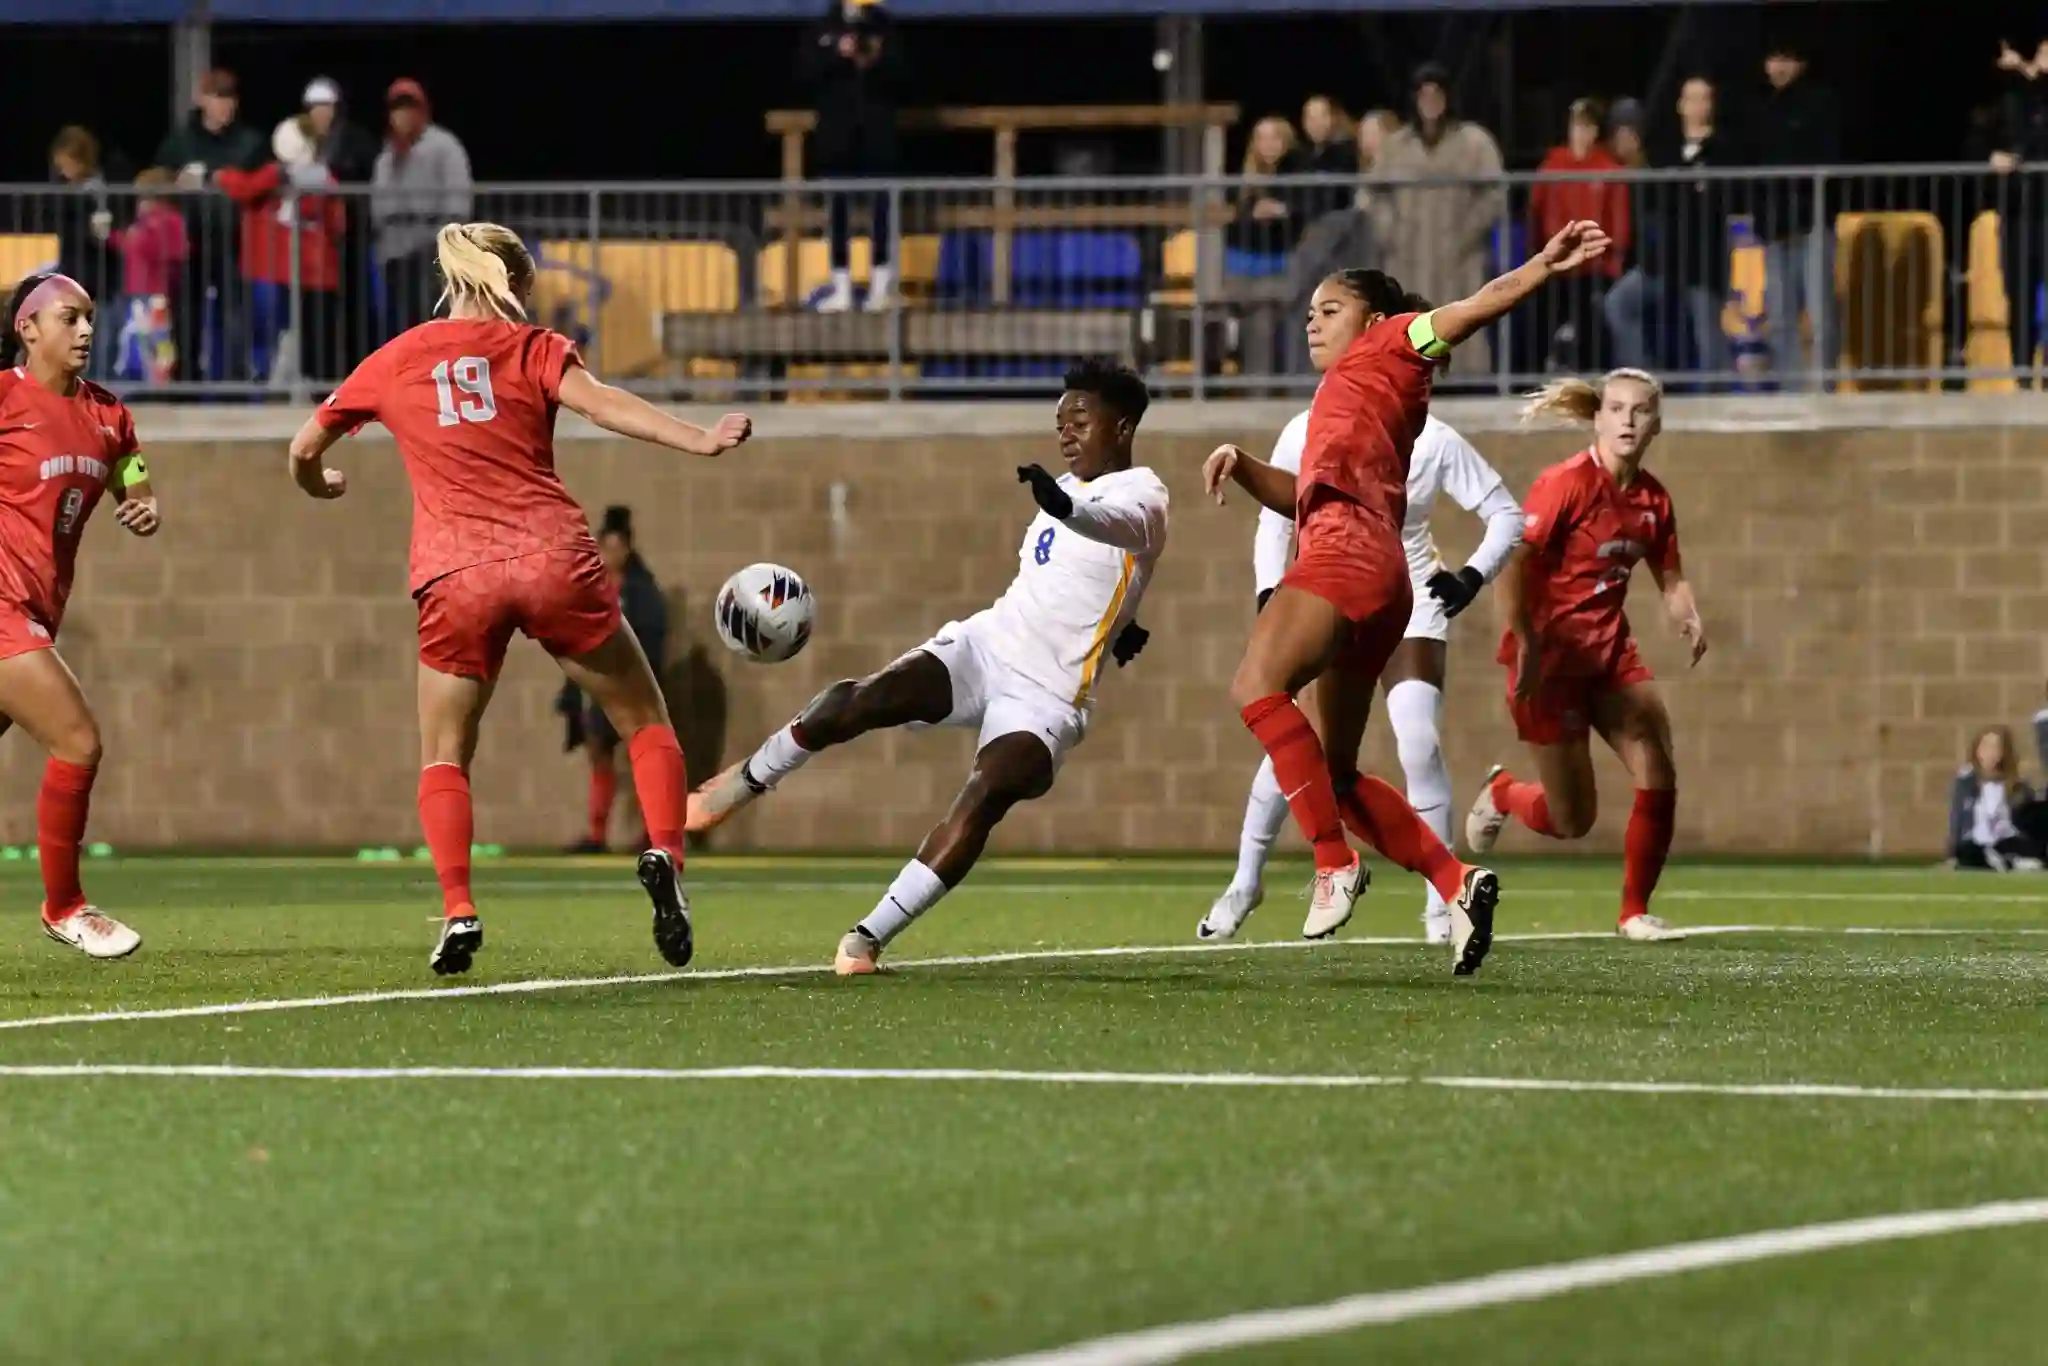 Abiodun Deborah Dedicates Fourth Goal for Pittsburgh Panthers to Late Brother